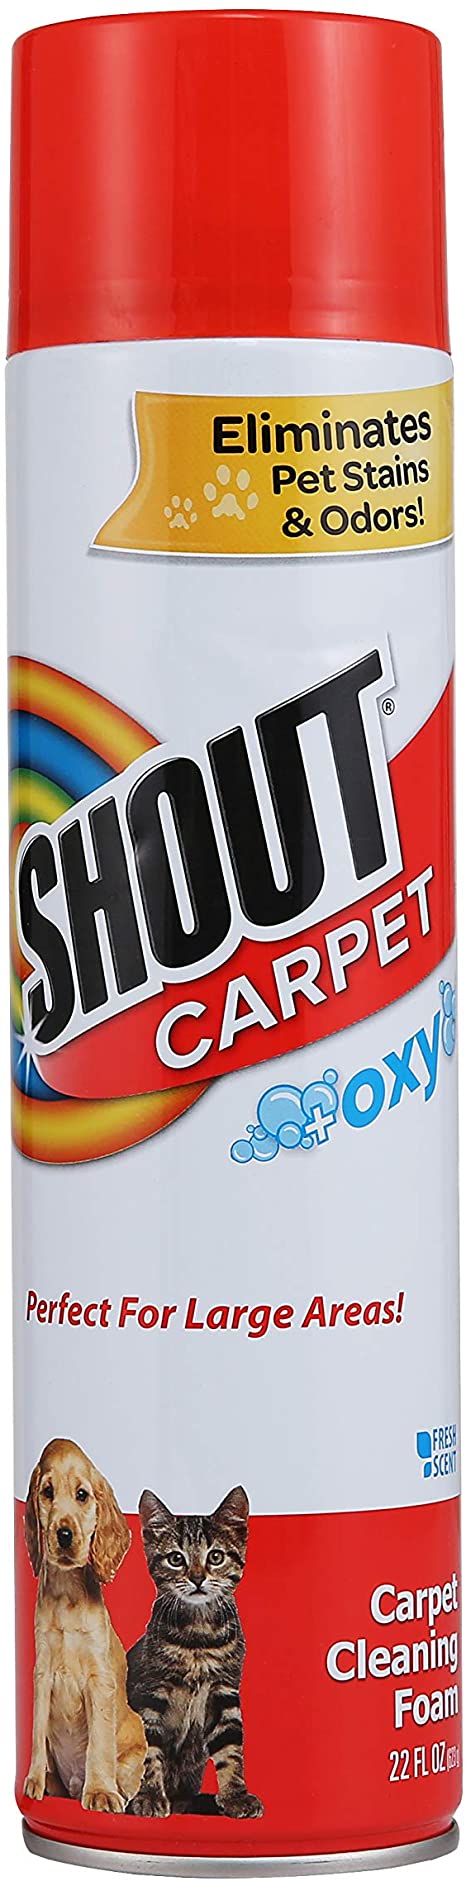 Shout Carpet Aerosol Stain and Odor Foaming Spray with OXY Power | Completely Removes Tough Urine Stains & Prevents Remarking | for Large Areas, 4 Pack, 4 Count